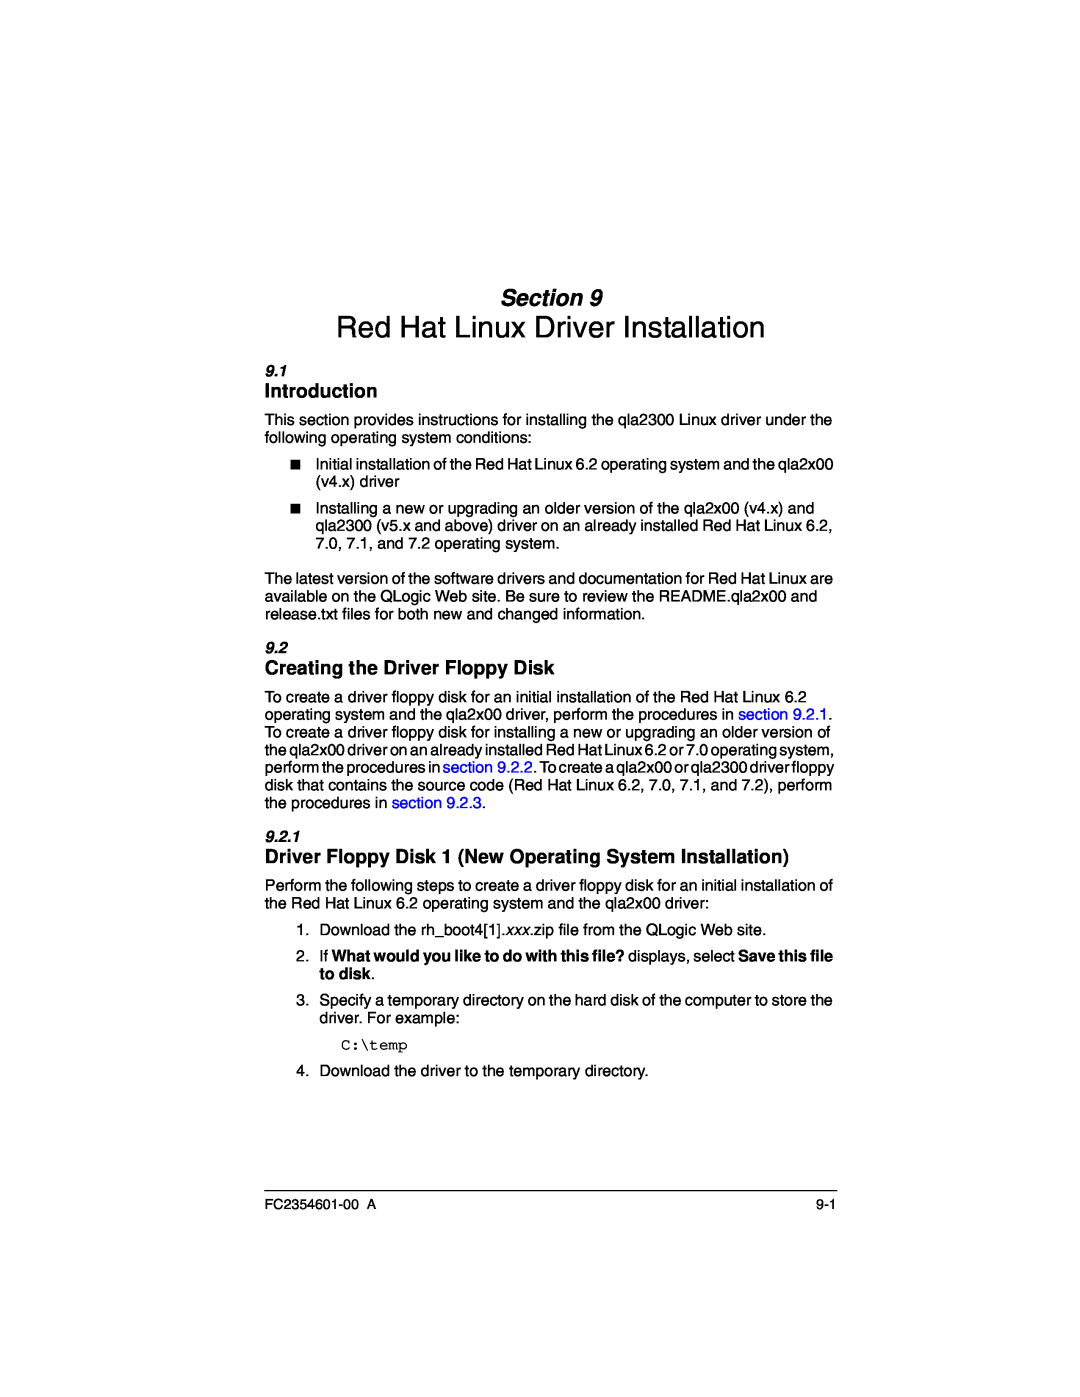 Q-Logic 2300 manual Red Hat Linux Driver Installation, Creating the Driver Floppy Disk, 9.2.1, Section, Introduction 